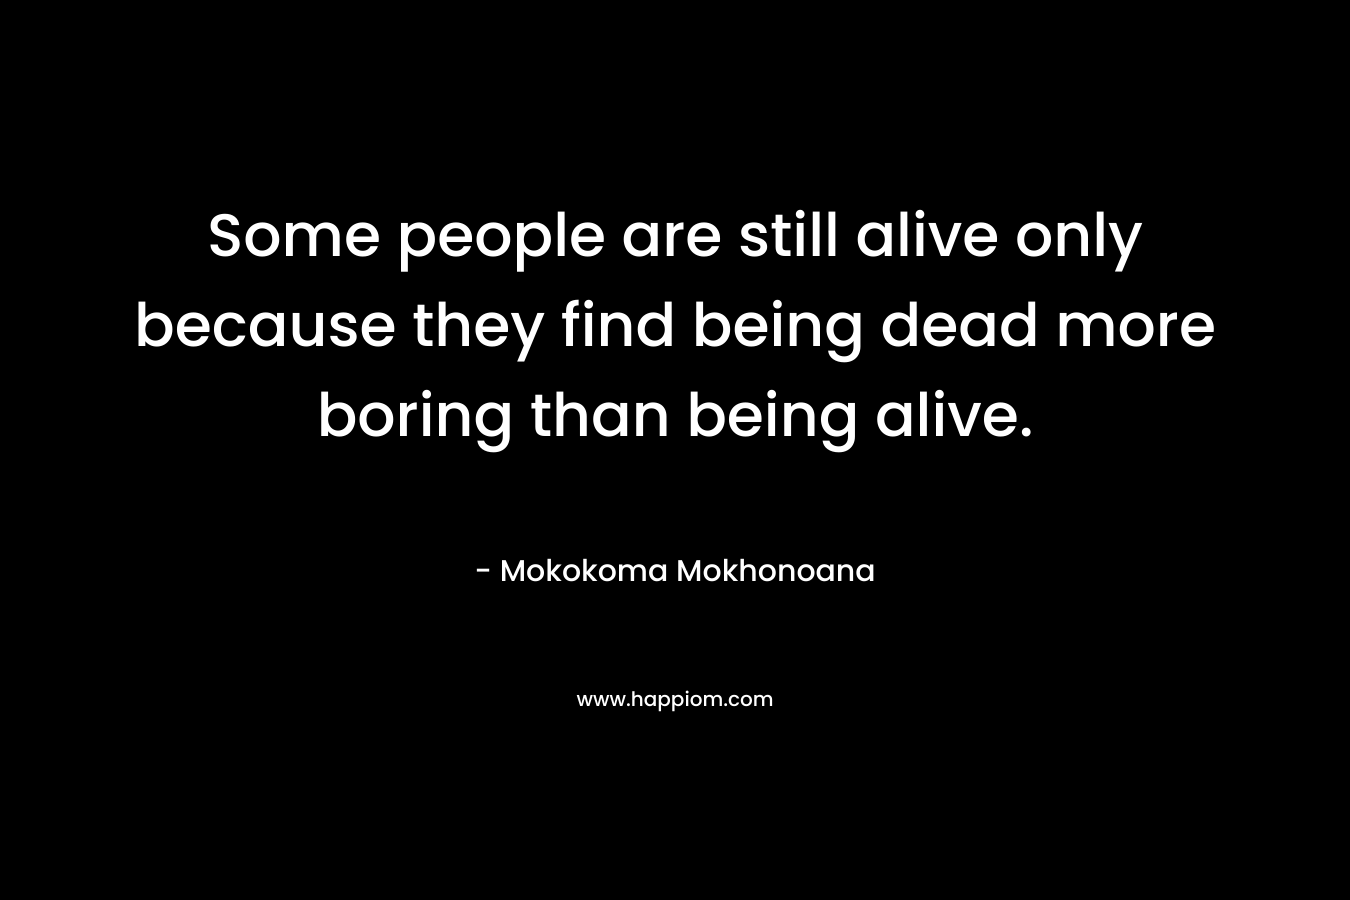 Some people are still alive only because they find being dead more boring than being alive.